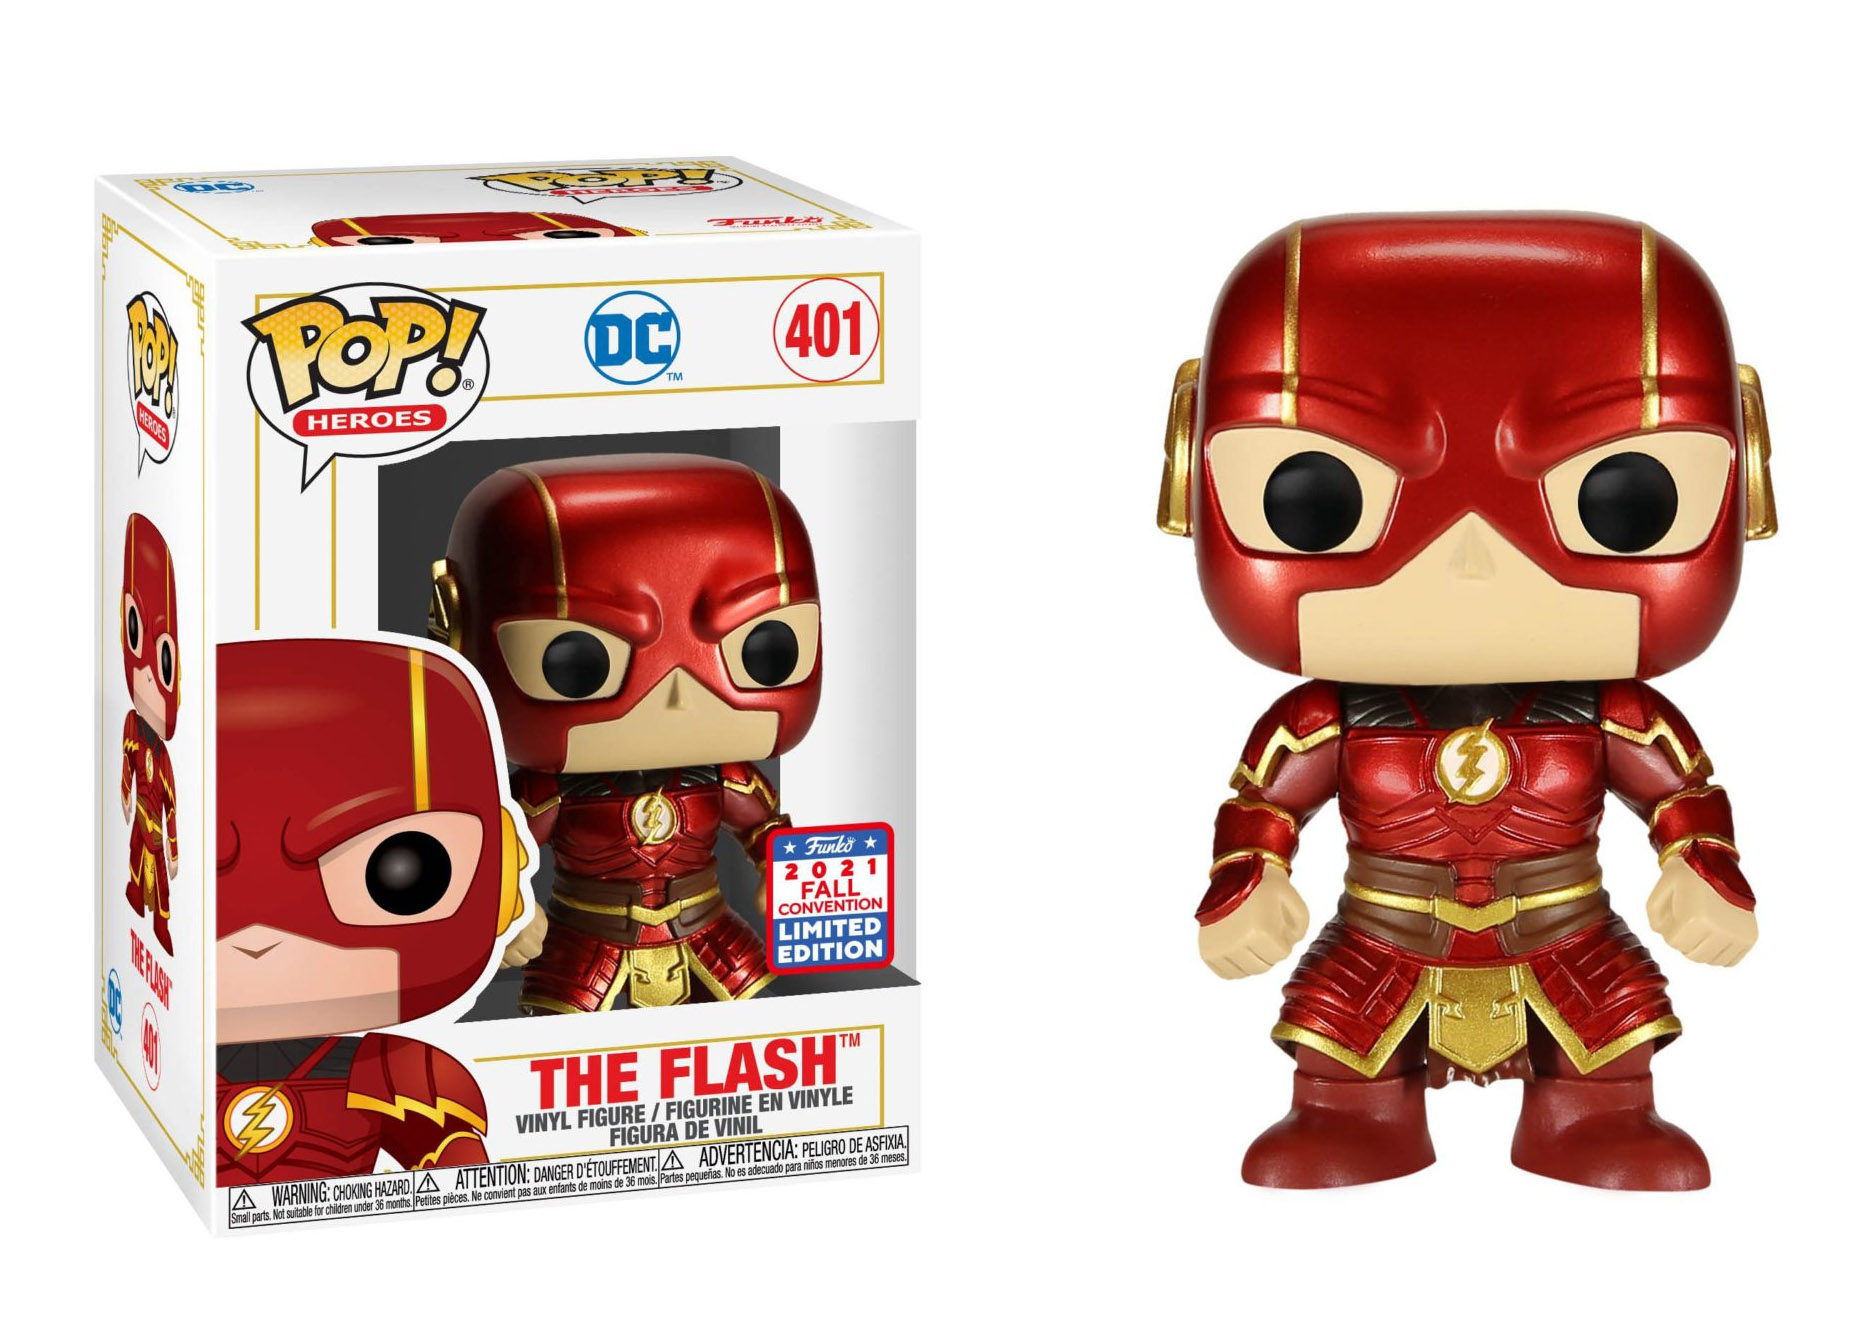 Funko Pop! Heroes DC The Flash 2021 Fall Convention Exclusive